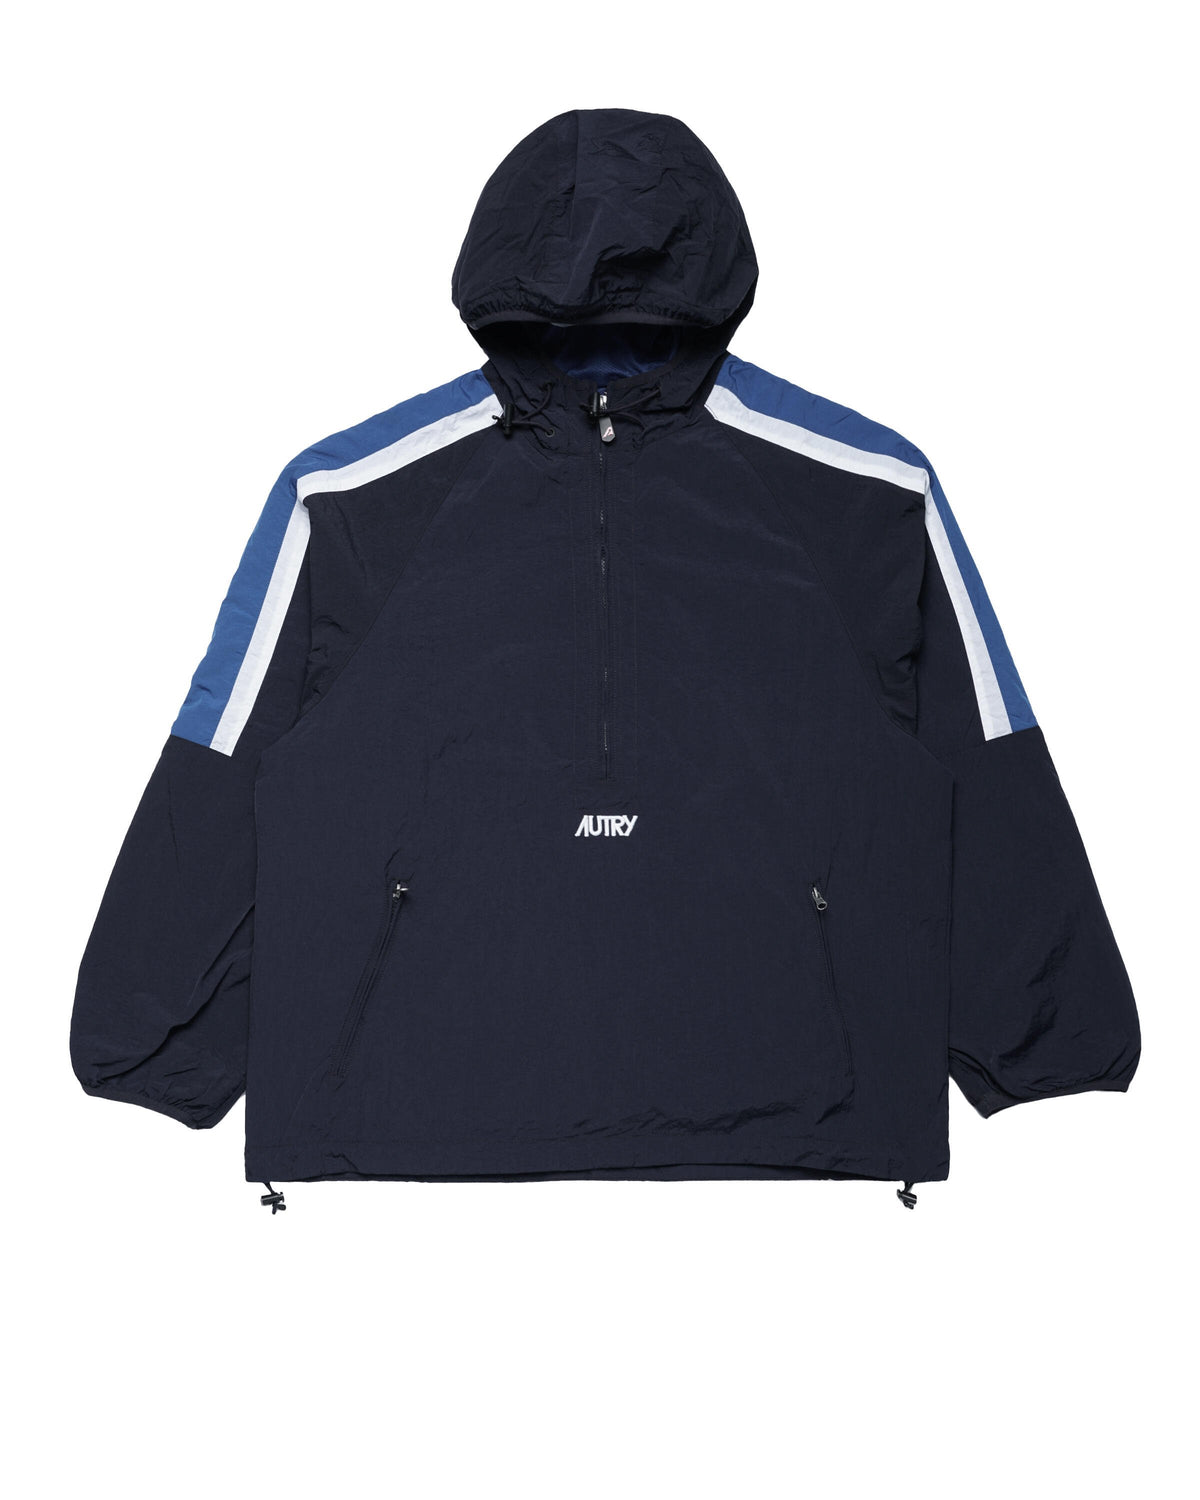 Autry Action Shoes JACKET SPOPRTY